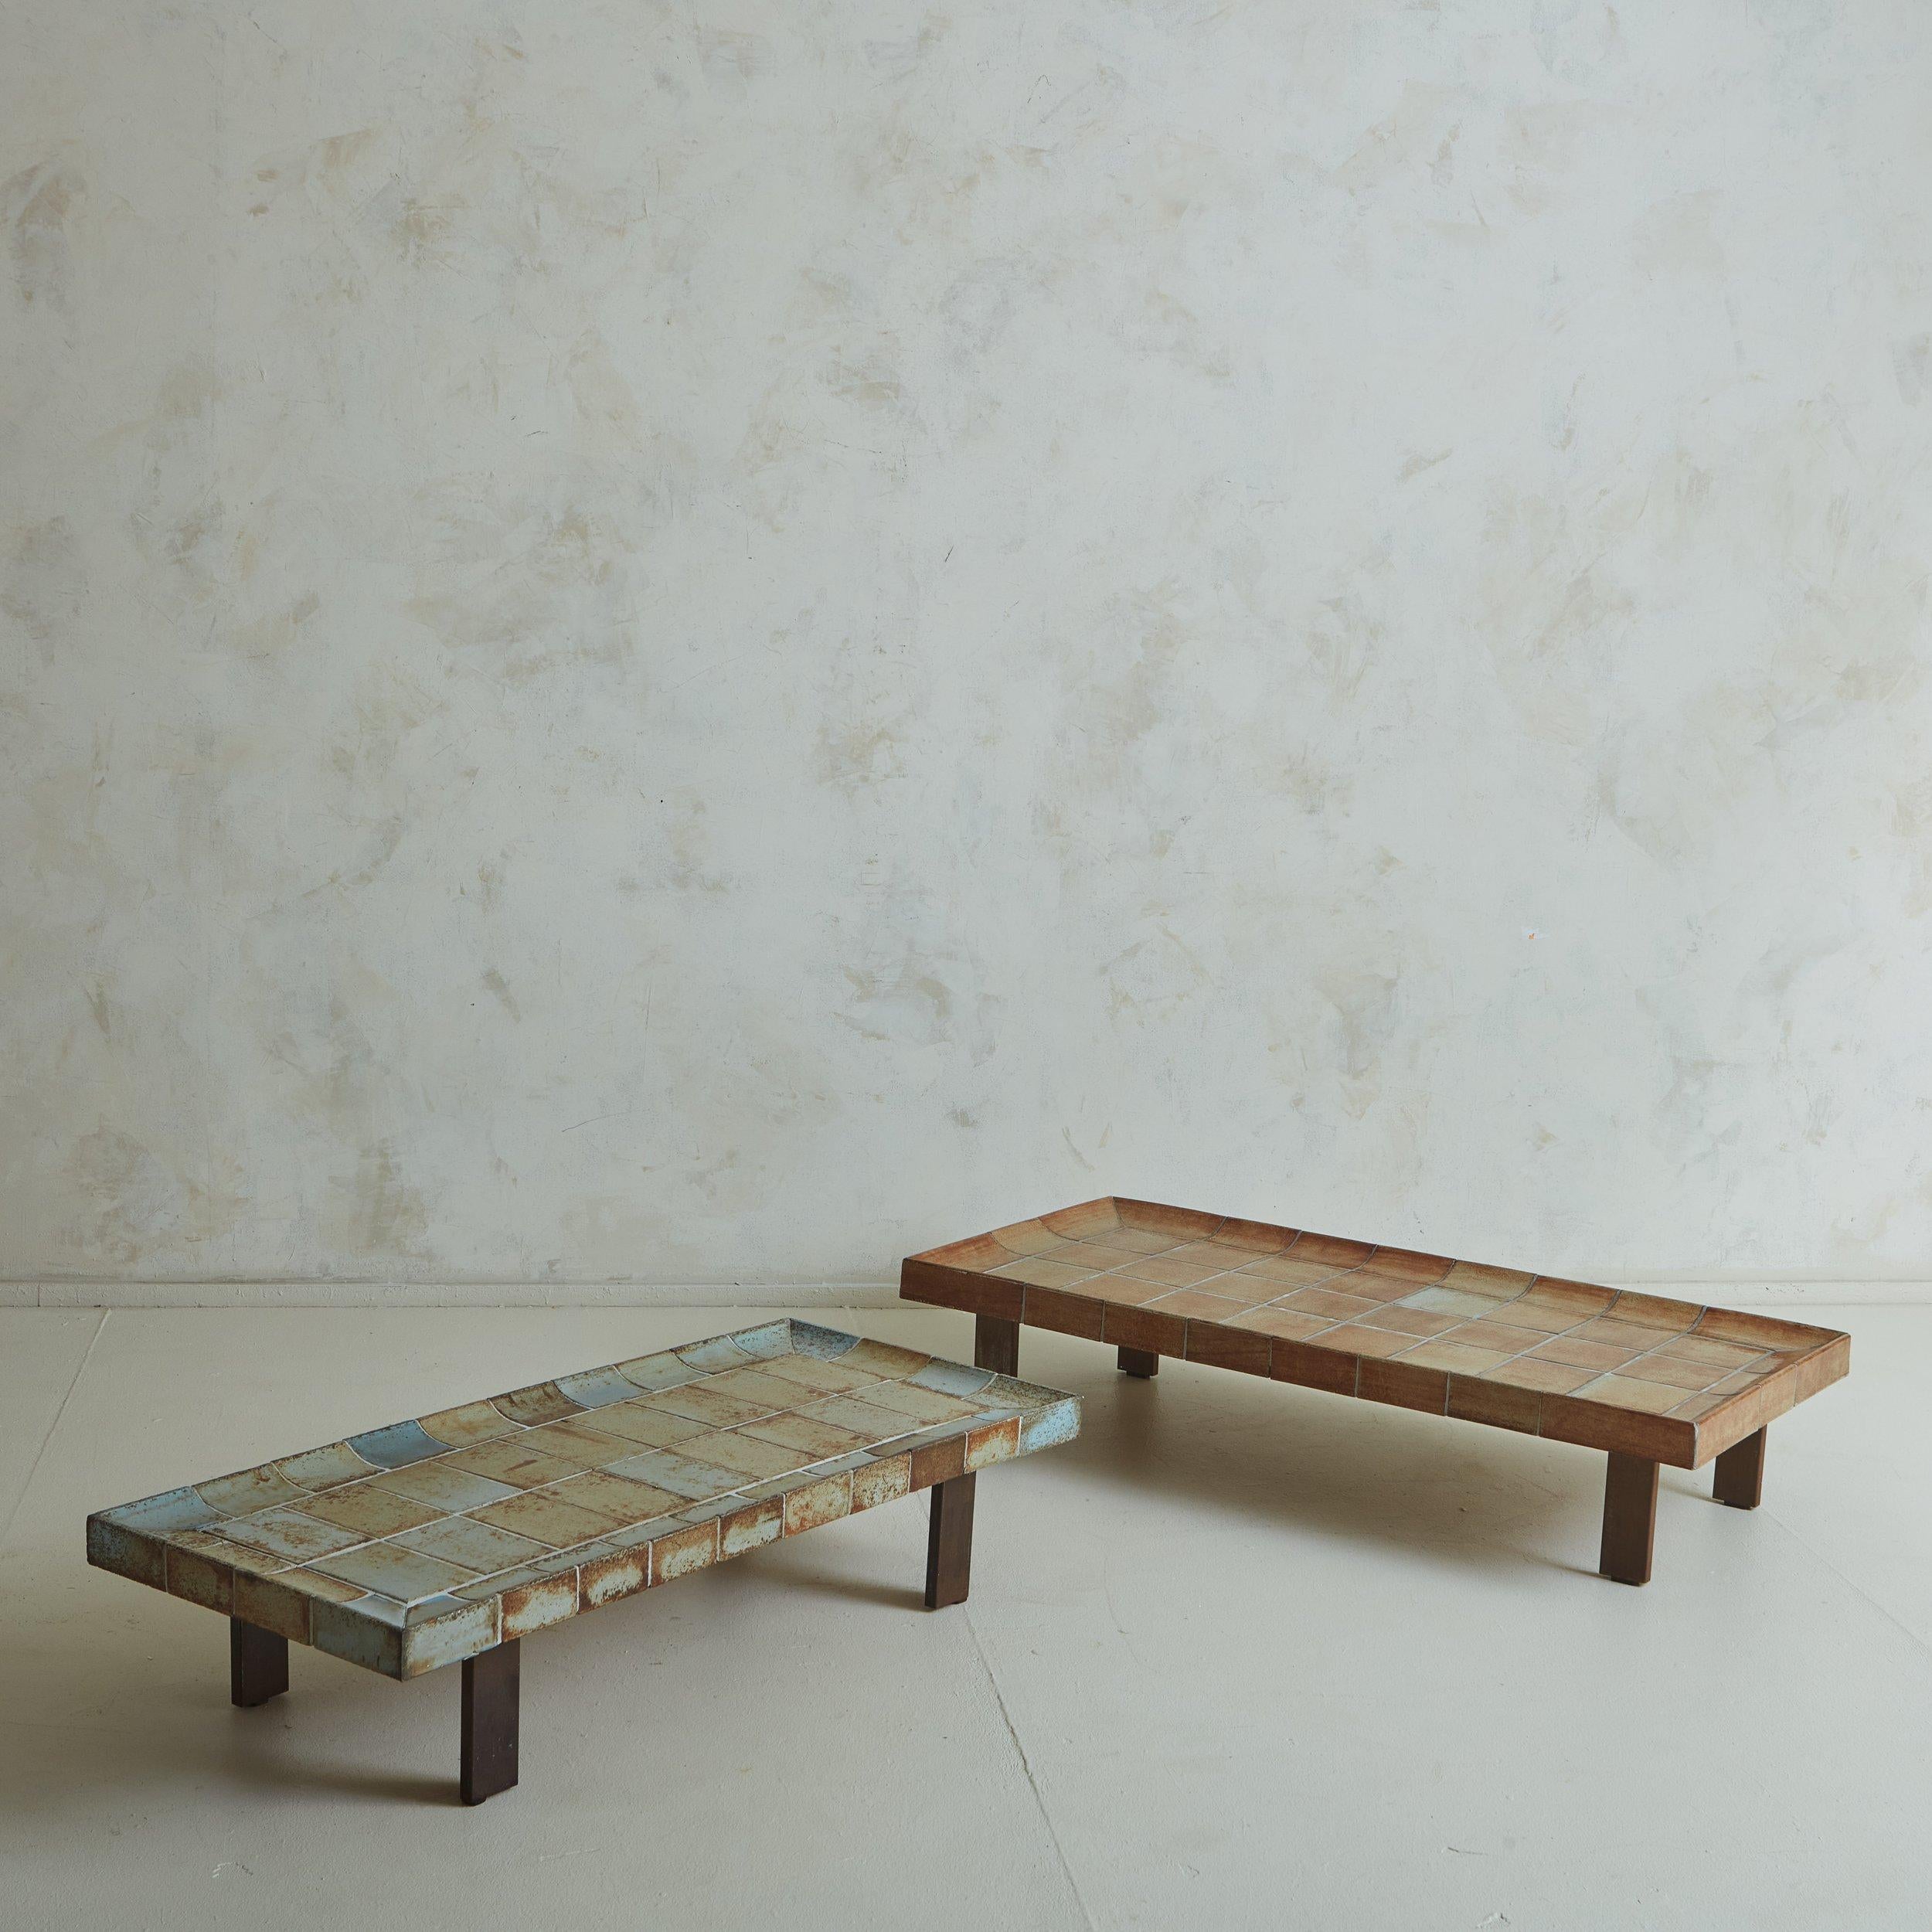 A 1960s ‘Cuvette’ coffee table by French ceramicist Roger Capron. This piece features a concave tabletop clad in gorgeous earthenware ceramic tiles from Vallauris, France. The tiles have rich color variations, which include a range of burnt orange